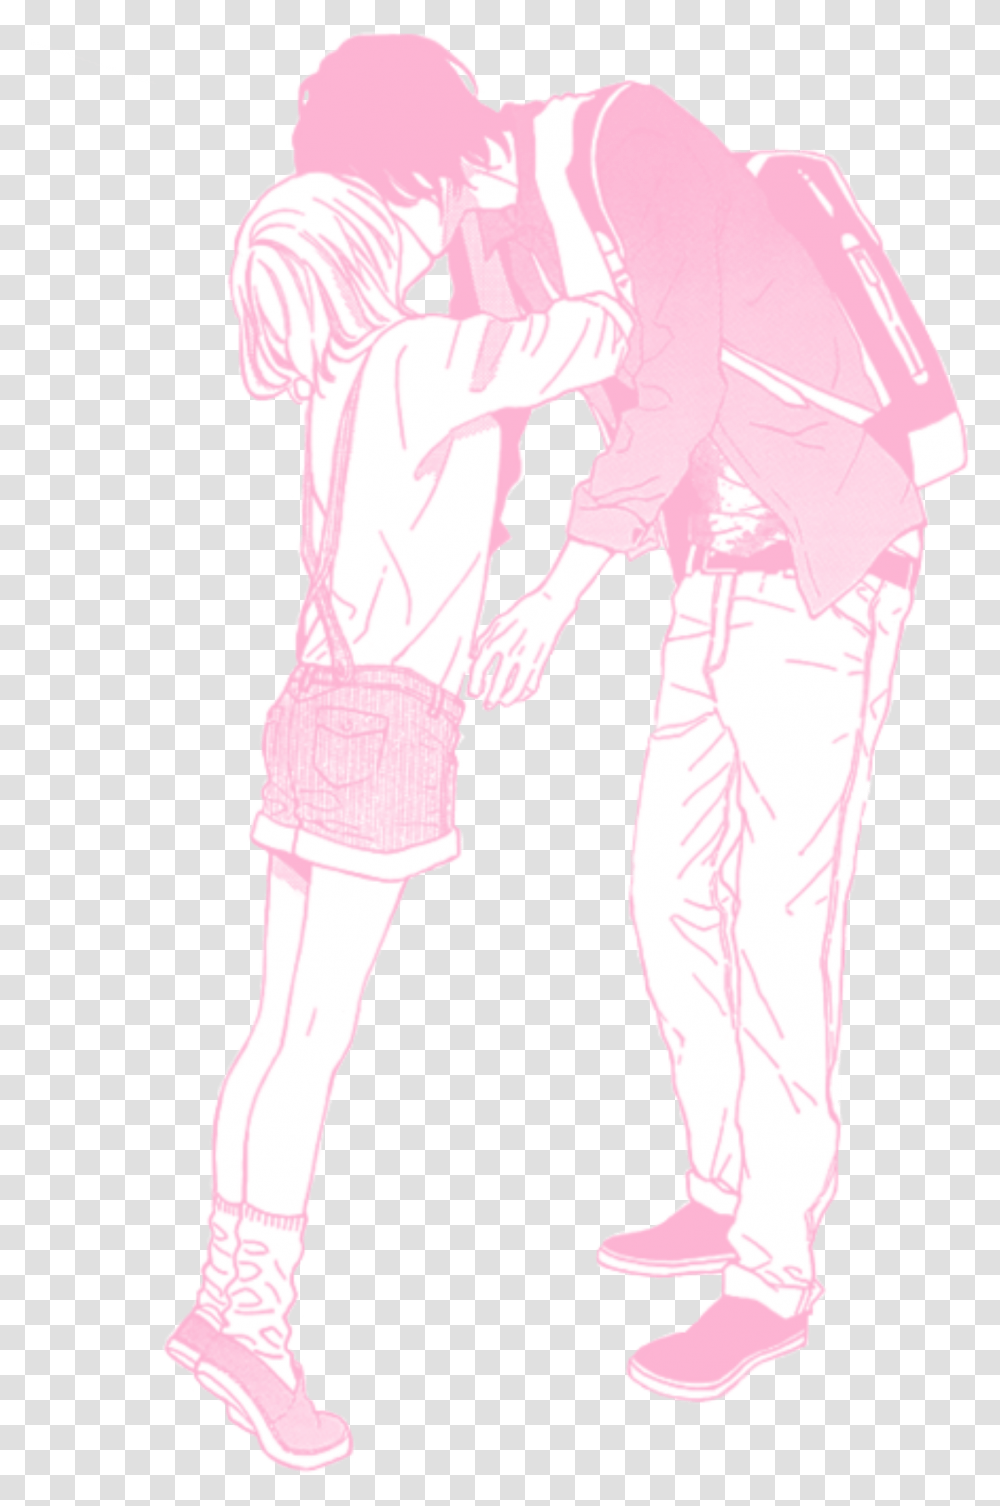 Pink Pastel Manga Anime Couple Love Anime Couple Background, Person, Architecture, Building Transparent Png